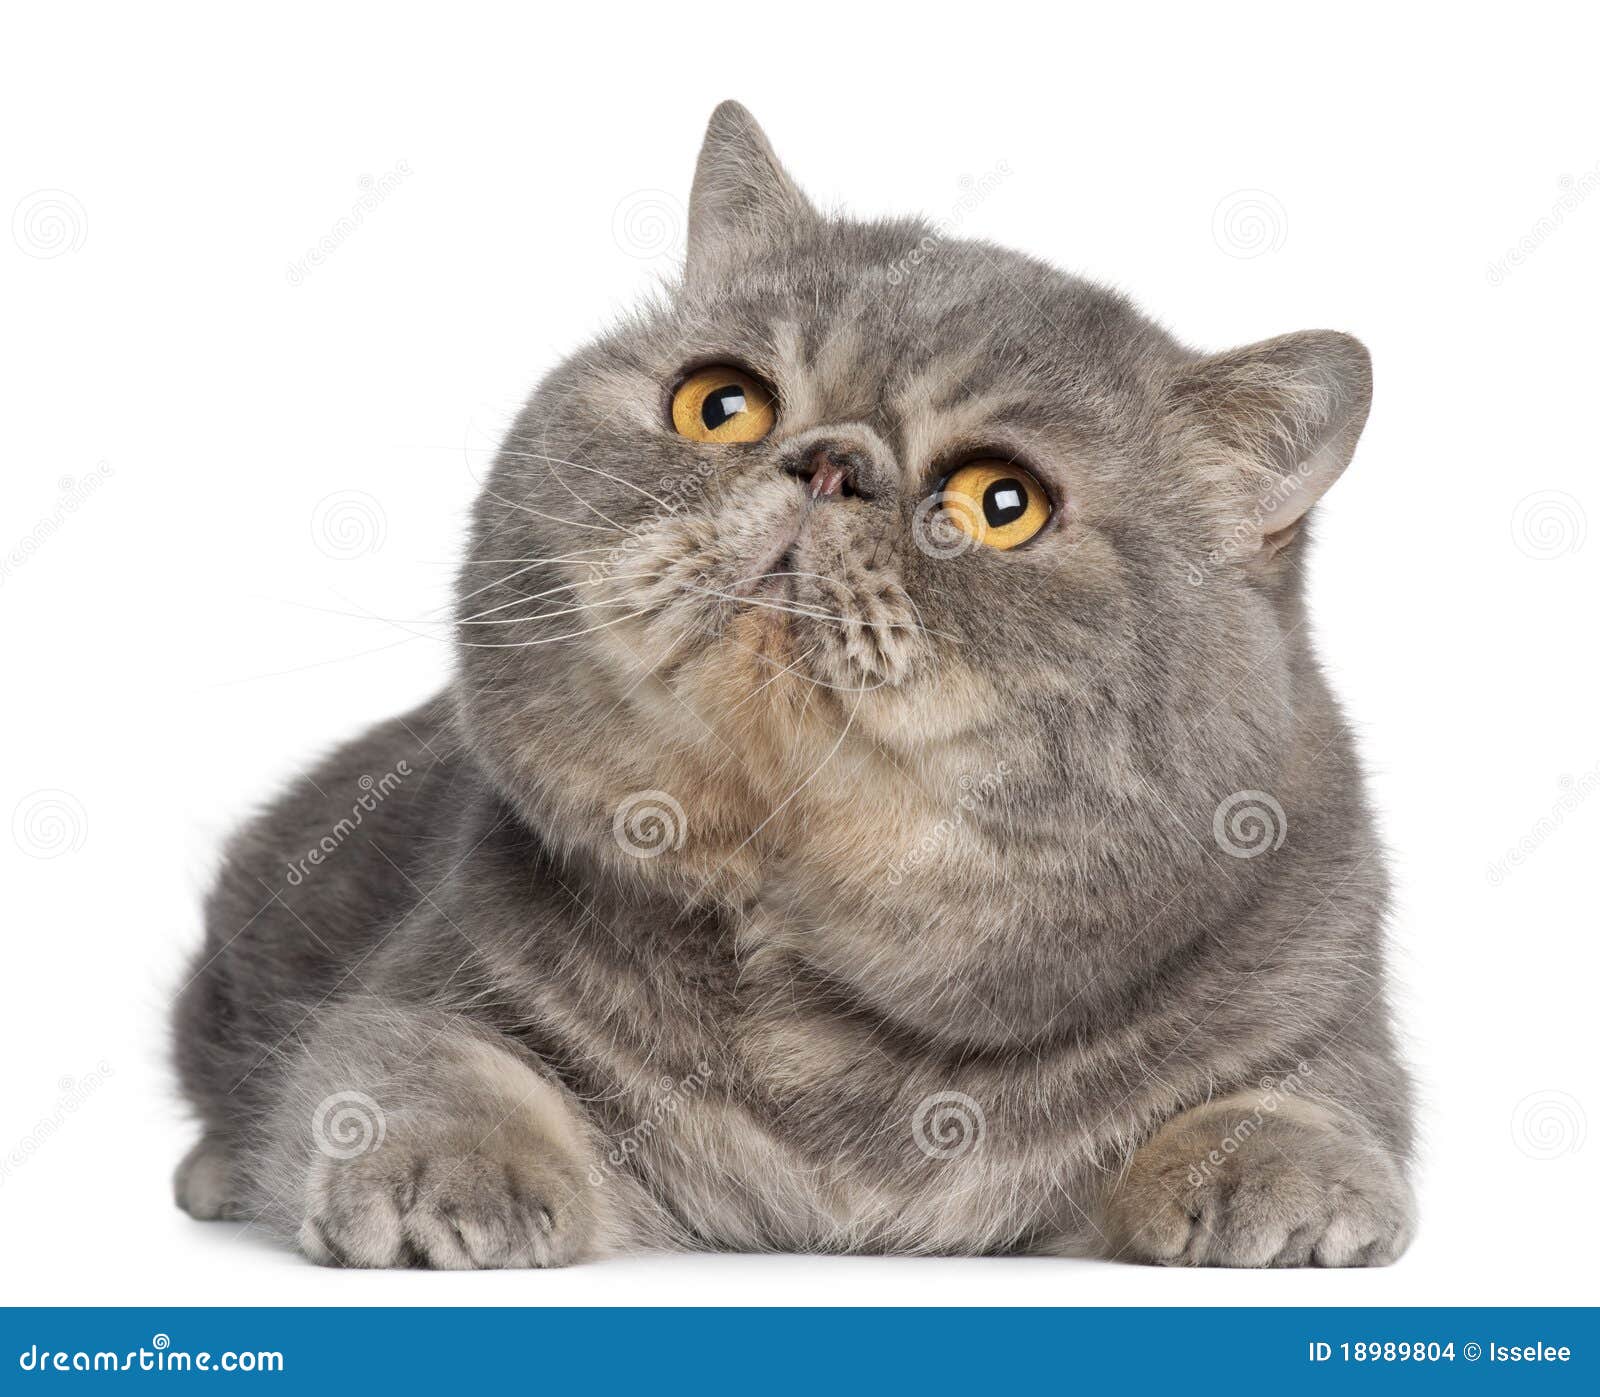 2 094 Exotic Shorthair Cat Photos Free Royalty Free Stock Photos From Dreamstime